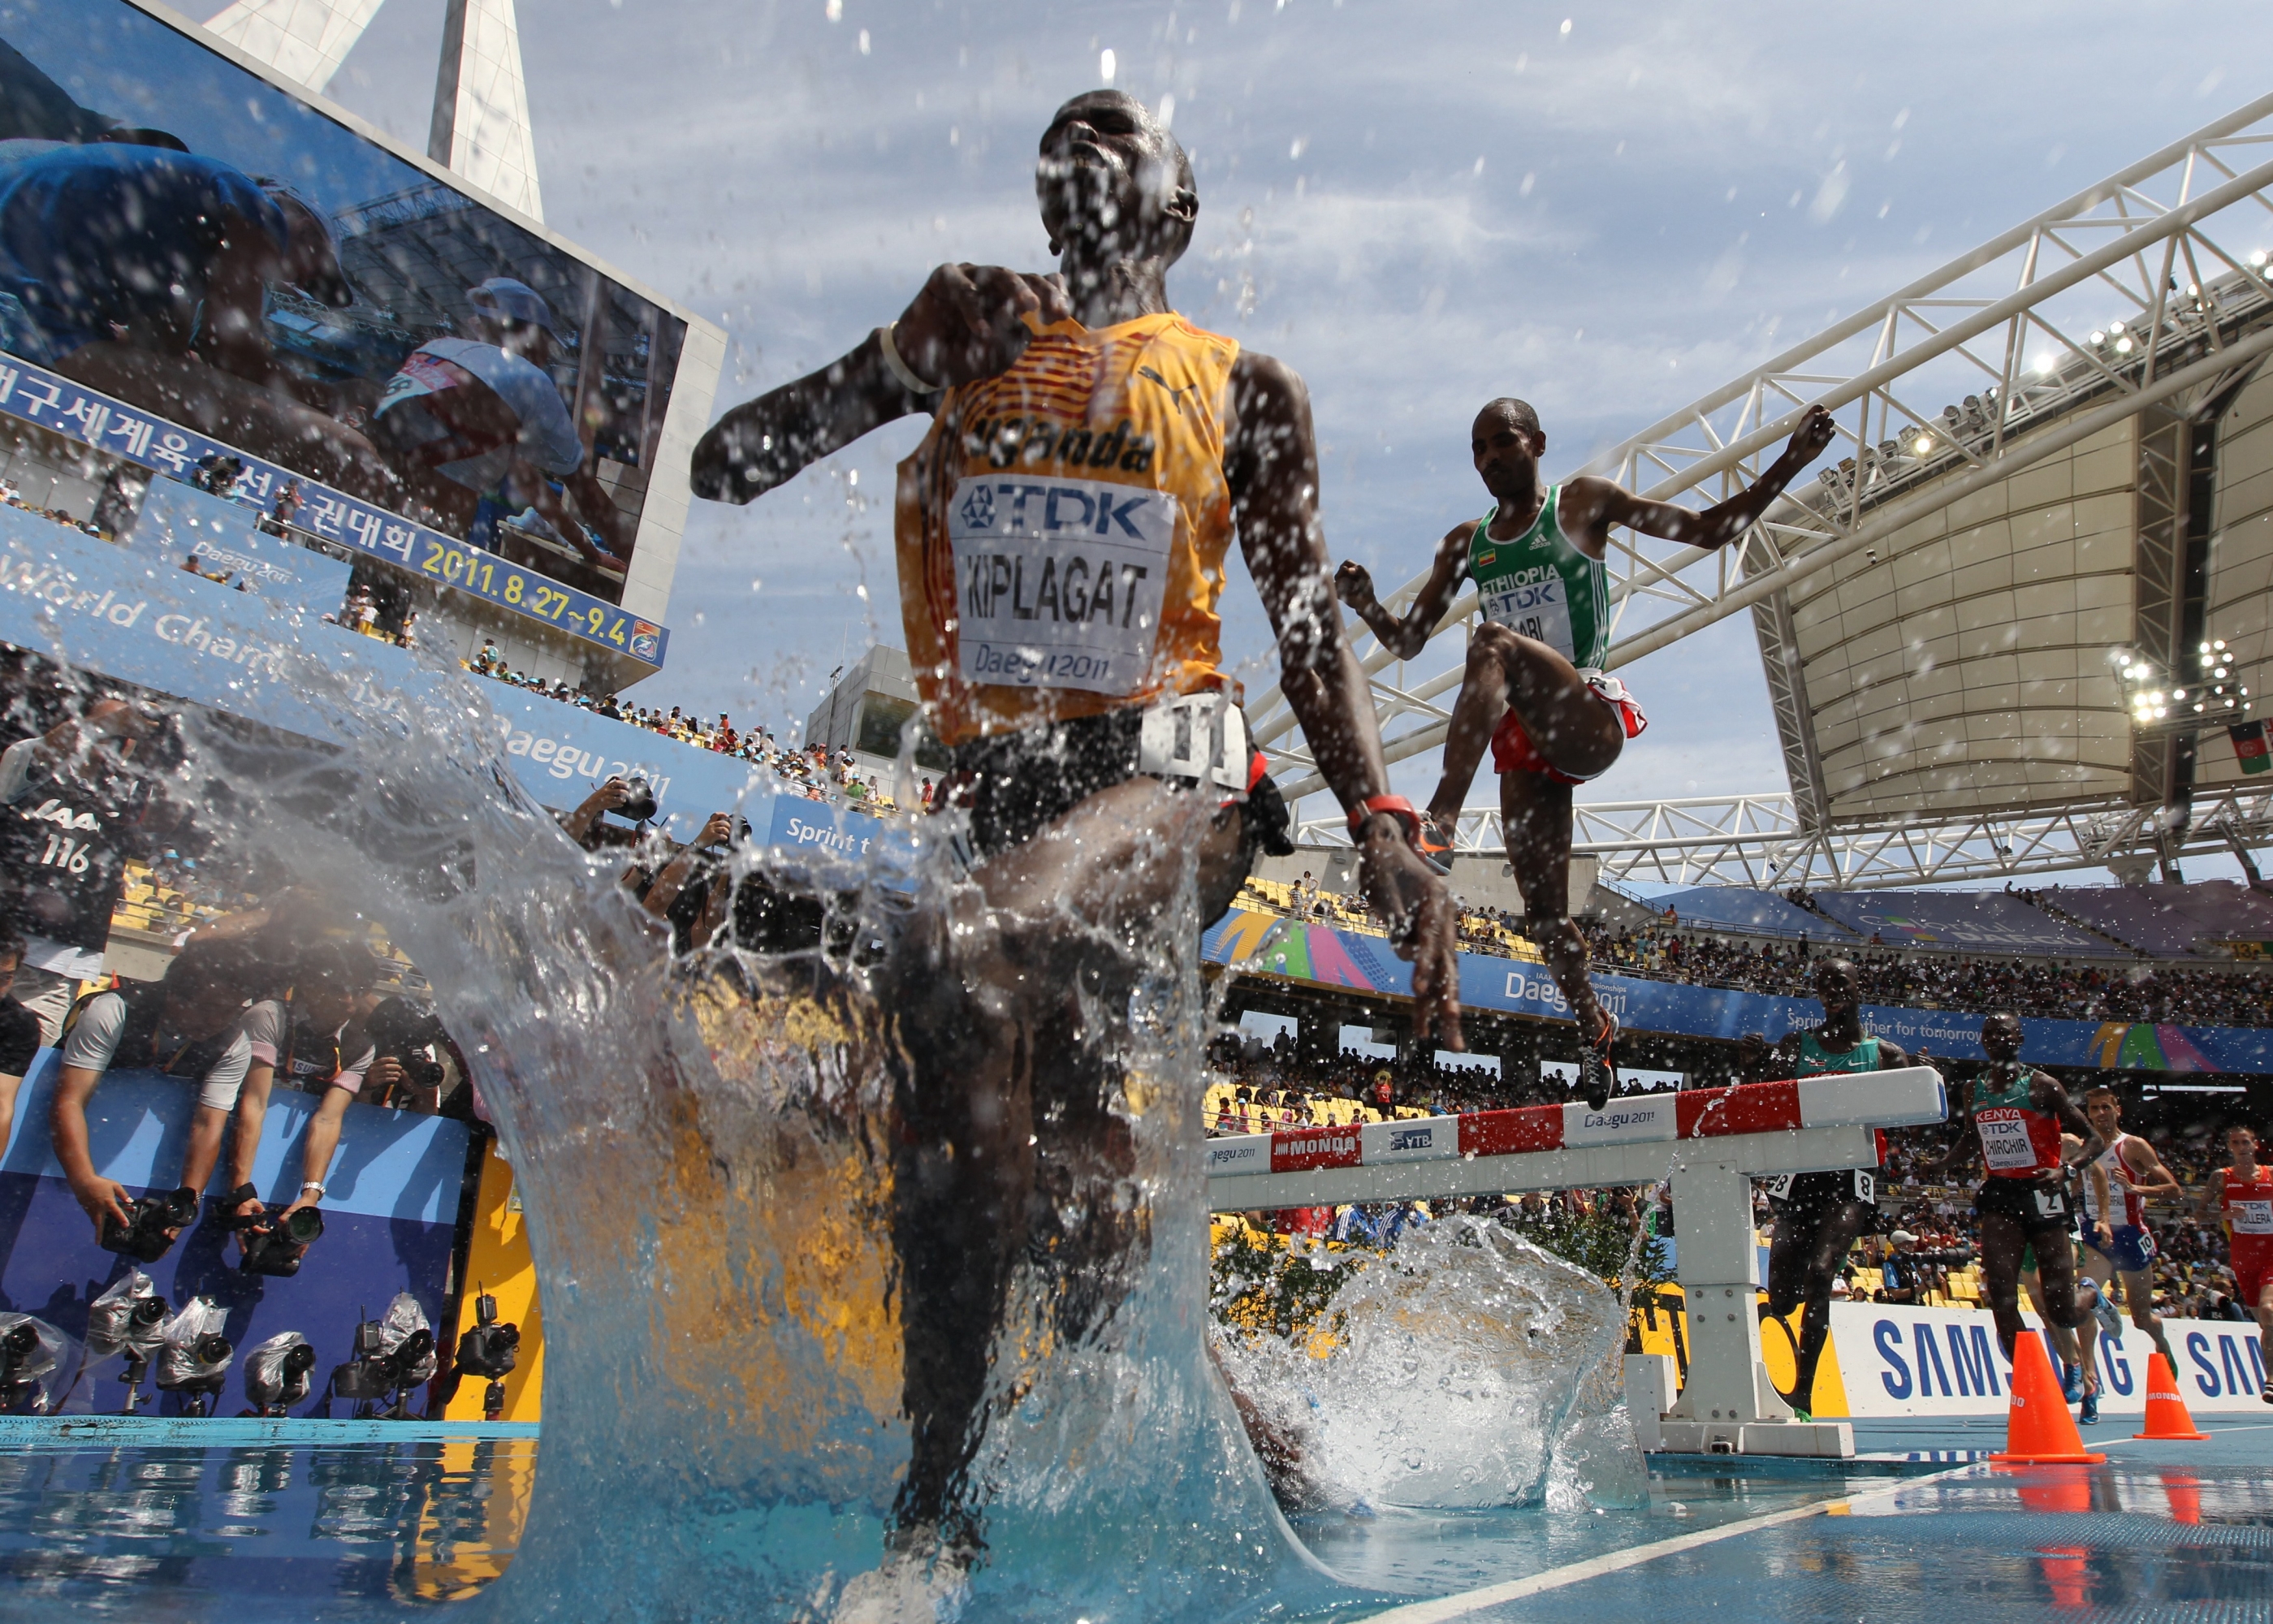 Uganda's Benjamin Kiplagat competes in the men's 3,000 metres steeplechase heats at the International Association of Athletics Federations (IAAF) World Championships in Daegu on August 29, 2011.  AFP PHOTO / ADRIAN DENNIS (Photo by ADRIAN DENNIS / AFP)